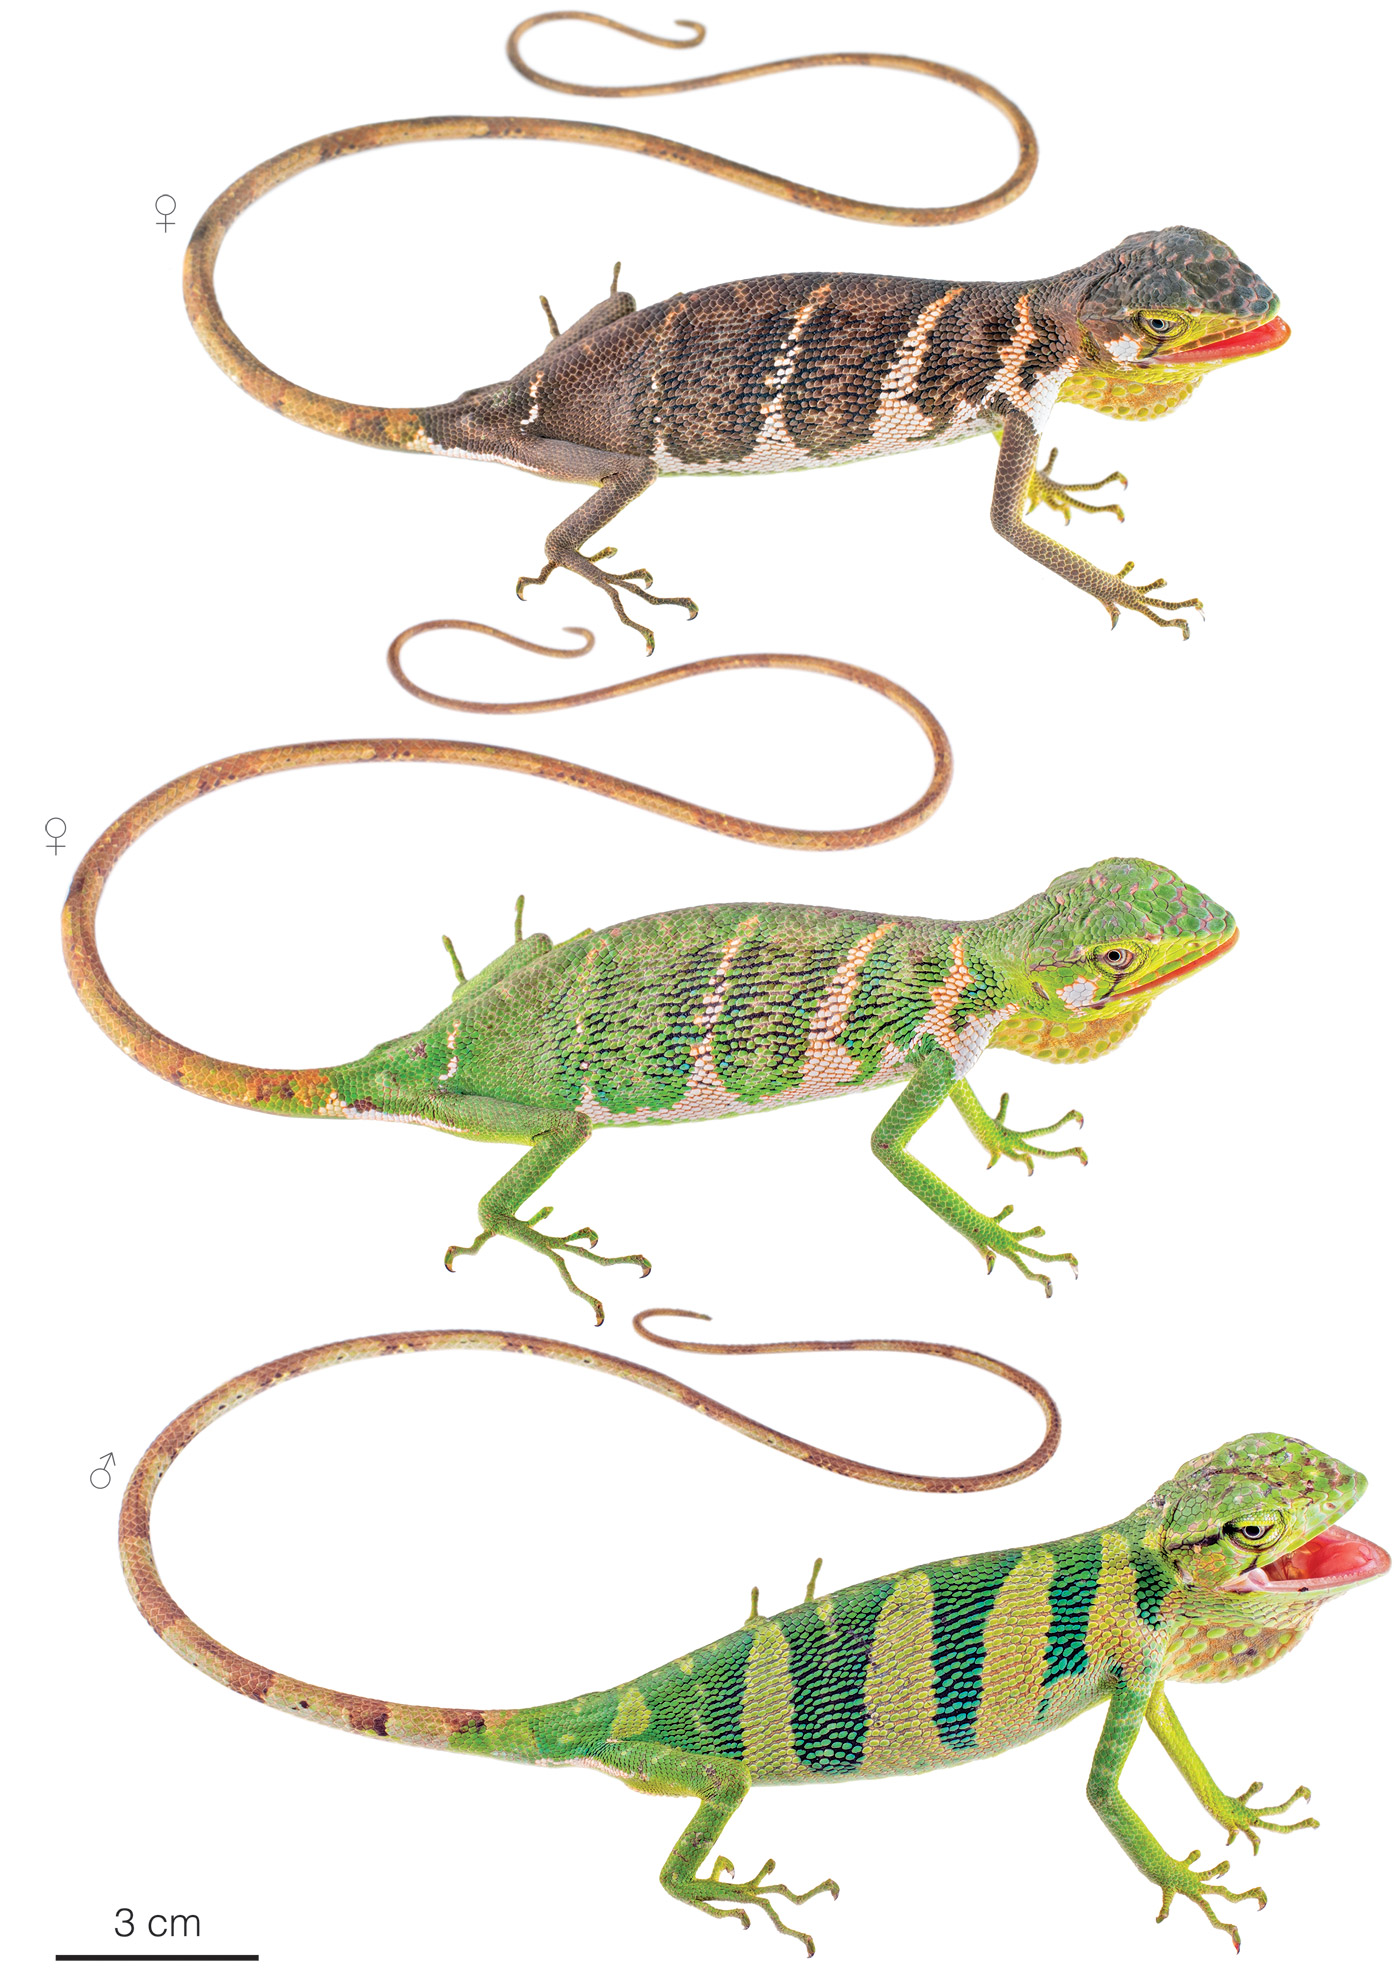 Figure showing variation among individuals of Polychrus gutturosus